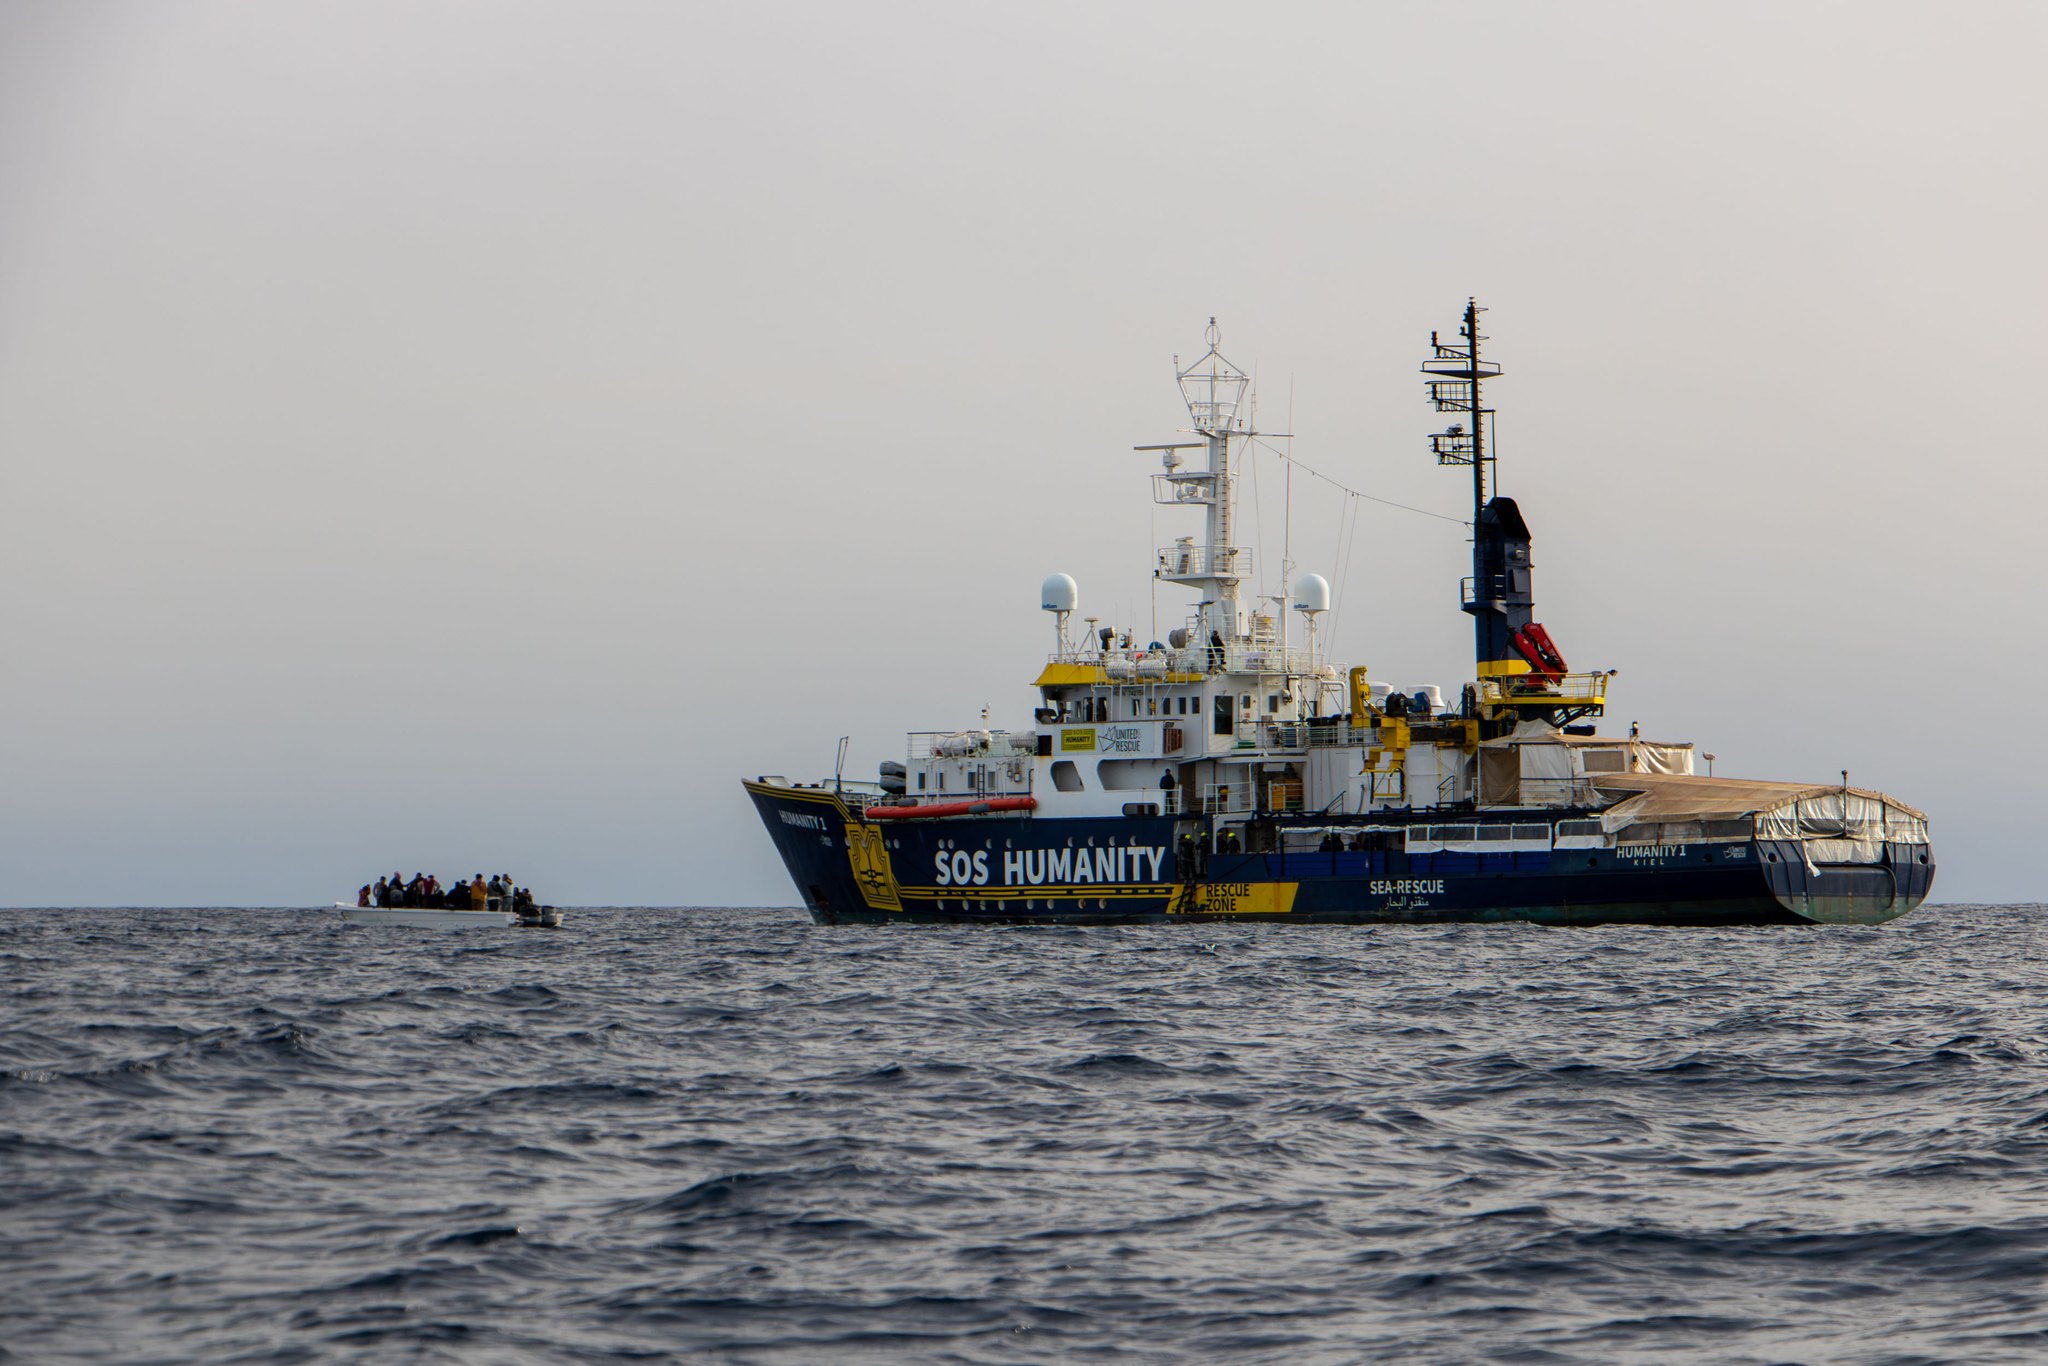 A German rescue group protests after Italy seizes a migrant rescue ship